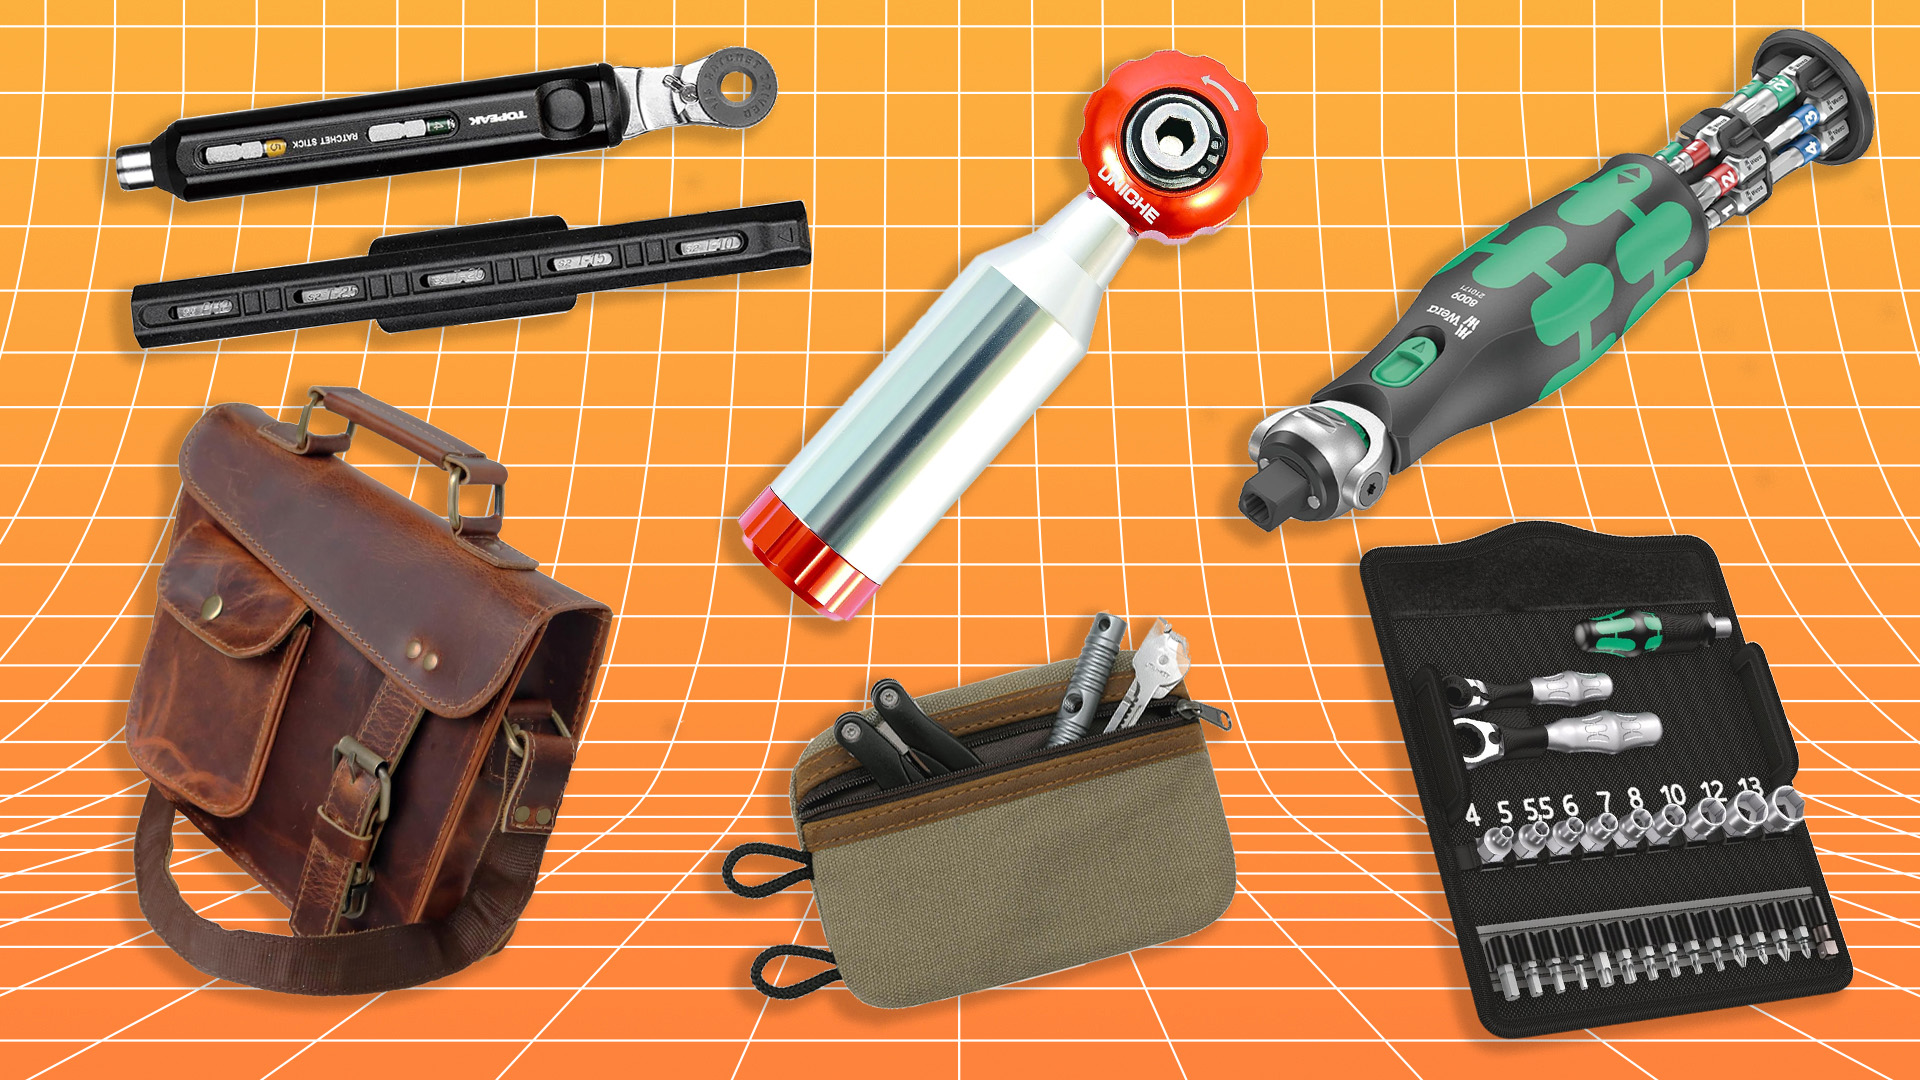 Big Deals On Useful EDC Tools at Amazon: Don’t Make A Bad Situation Worse With Frustrating Gadgets